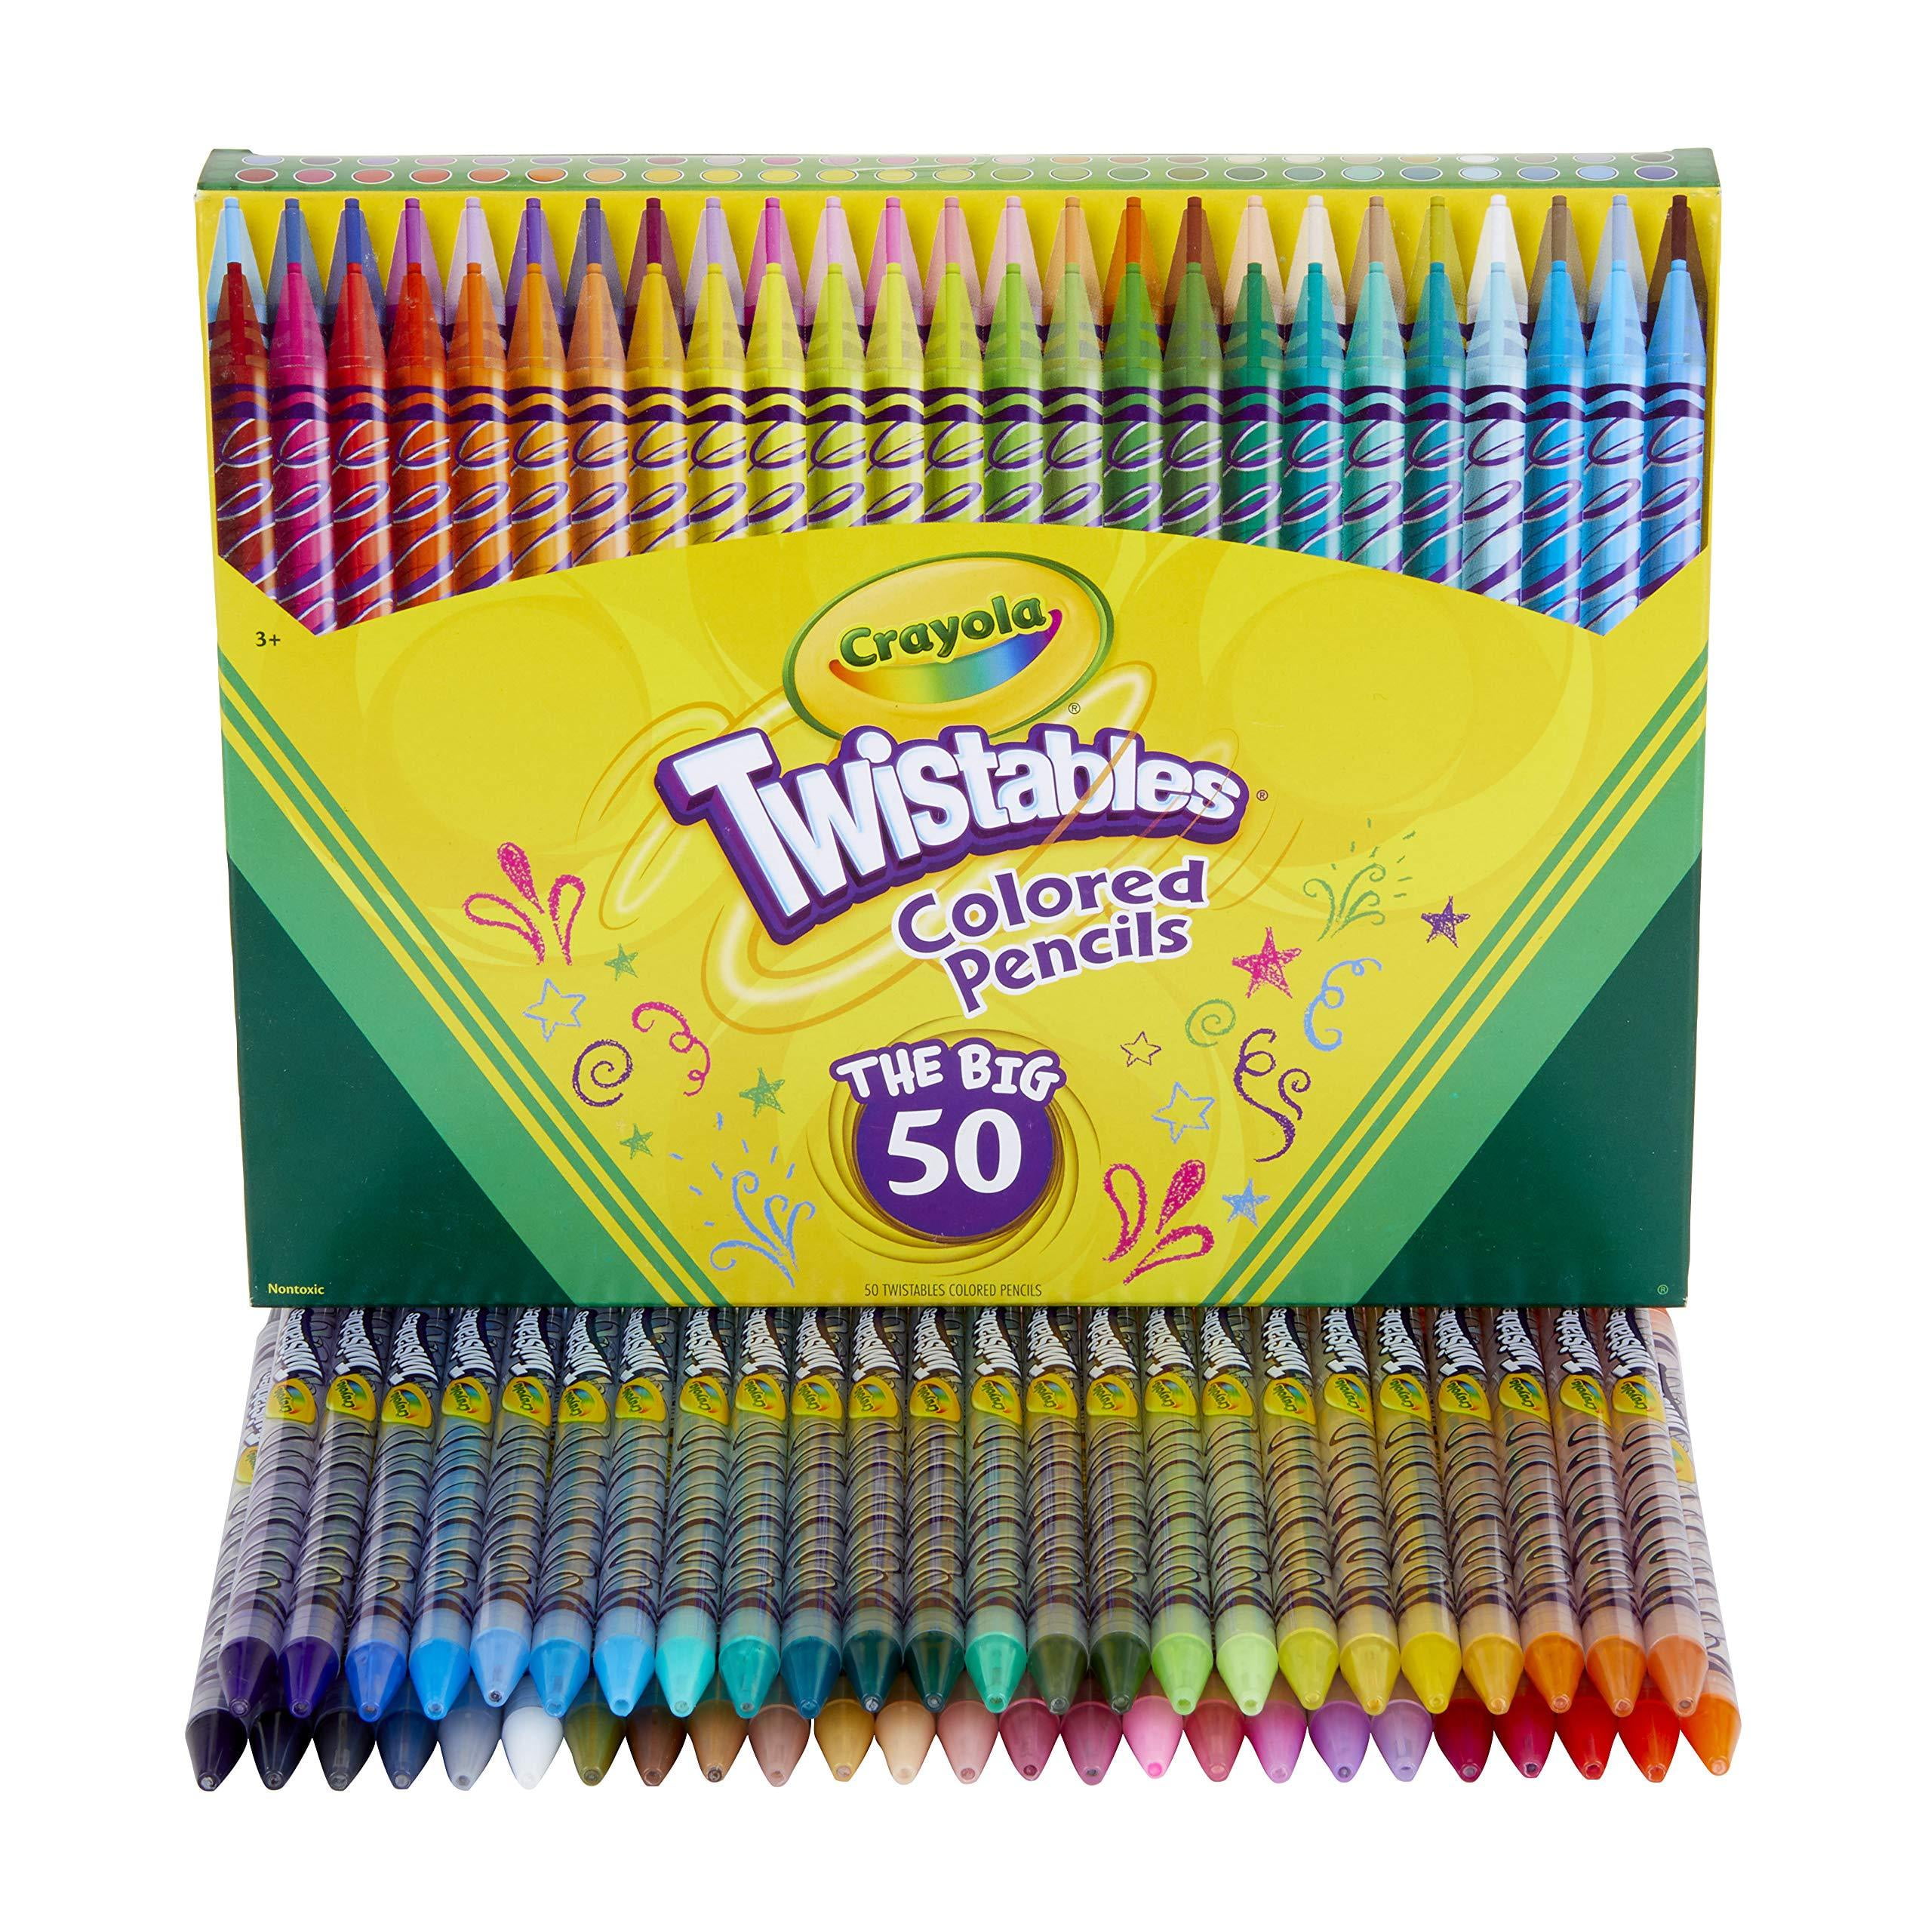 Crayola 12 Count Twistable Colored Pencils Only $1.50 (Reg. $6)